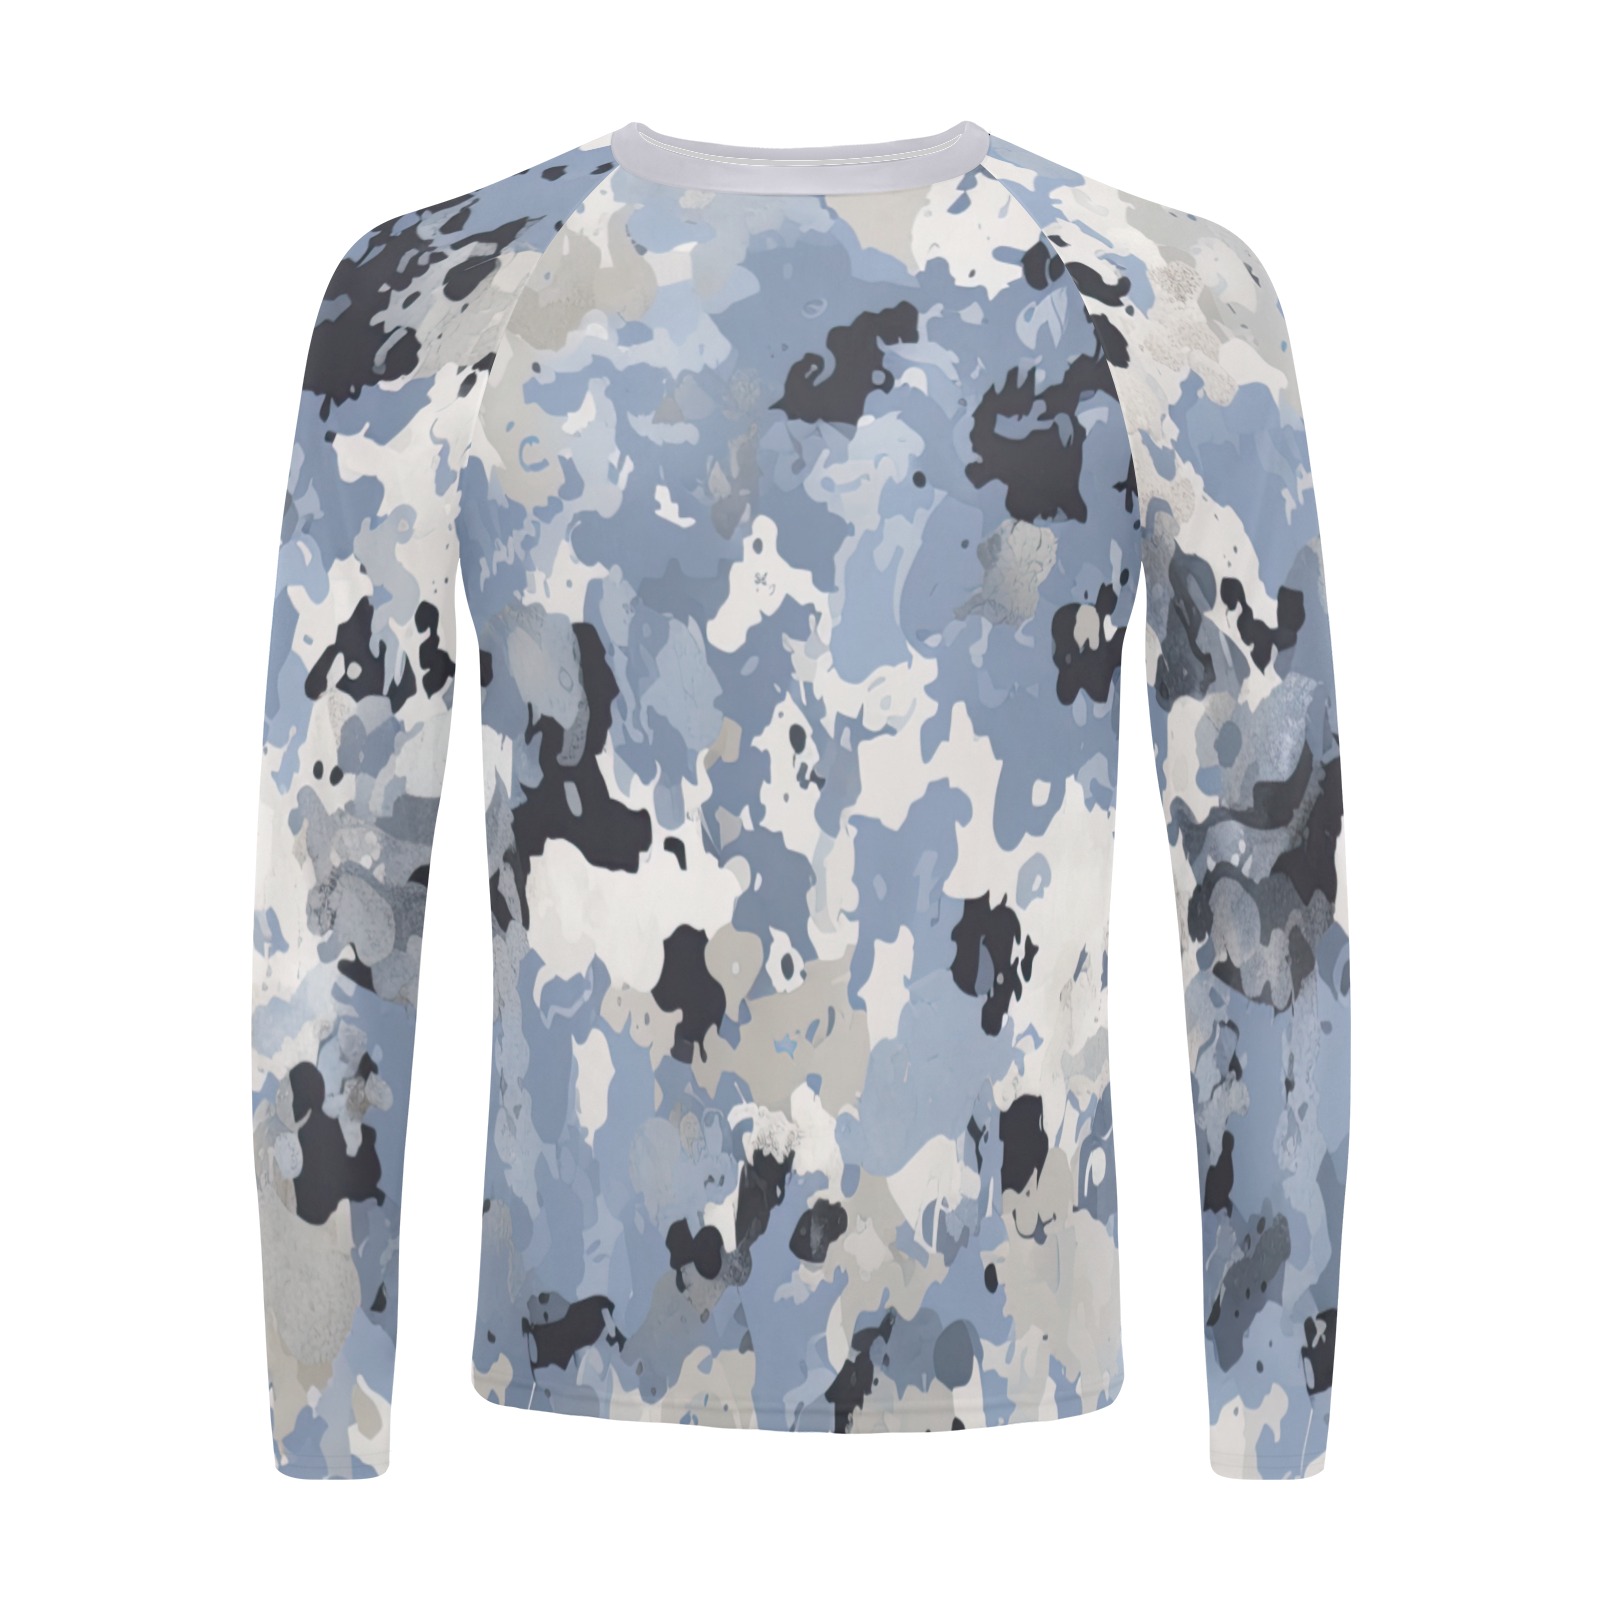 CG_camo_print_in_grey_blue_and_black_in_the_style_of_pointillis_dd2dd455-e628-447d-b69c-e71027b6f83a Men's Long Sleeve Swim Shirt (Model S39)